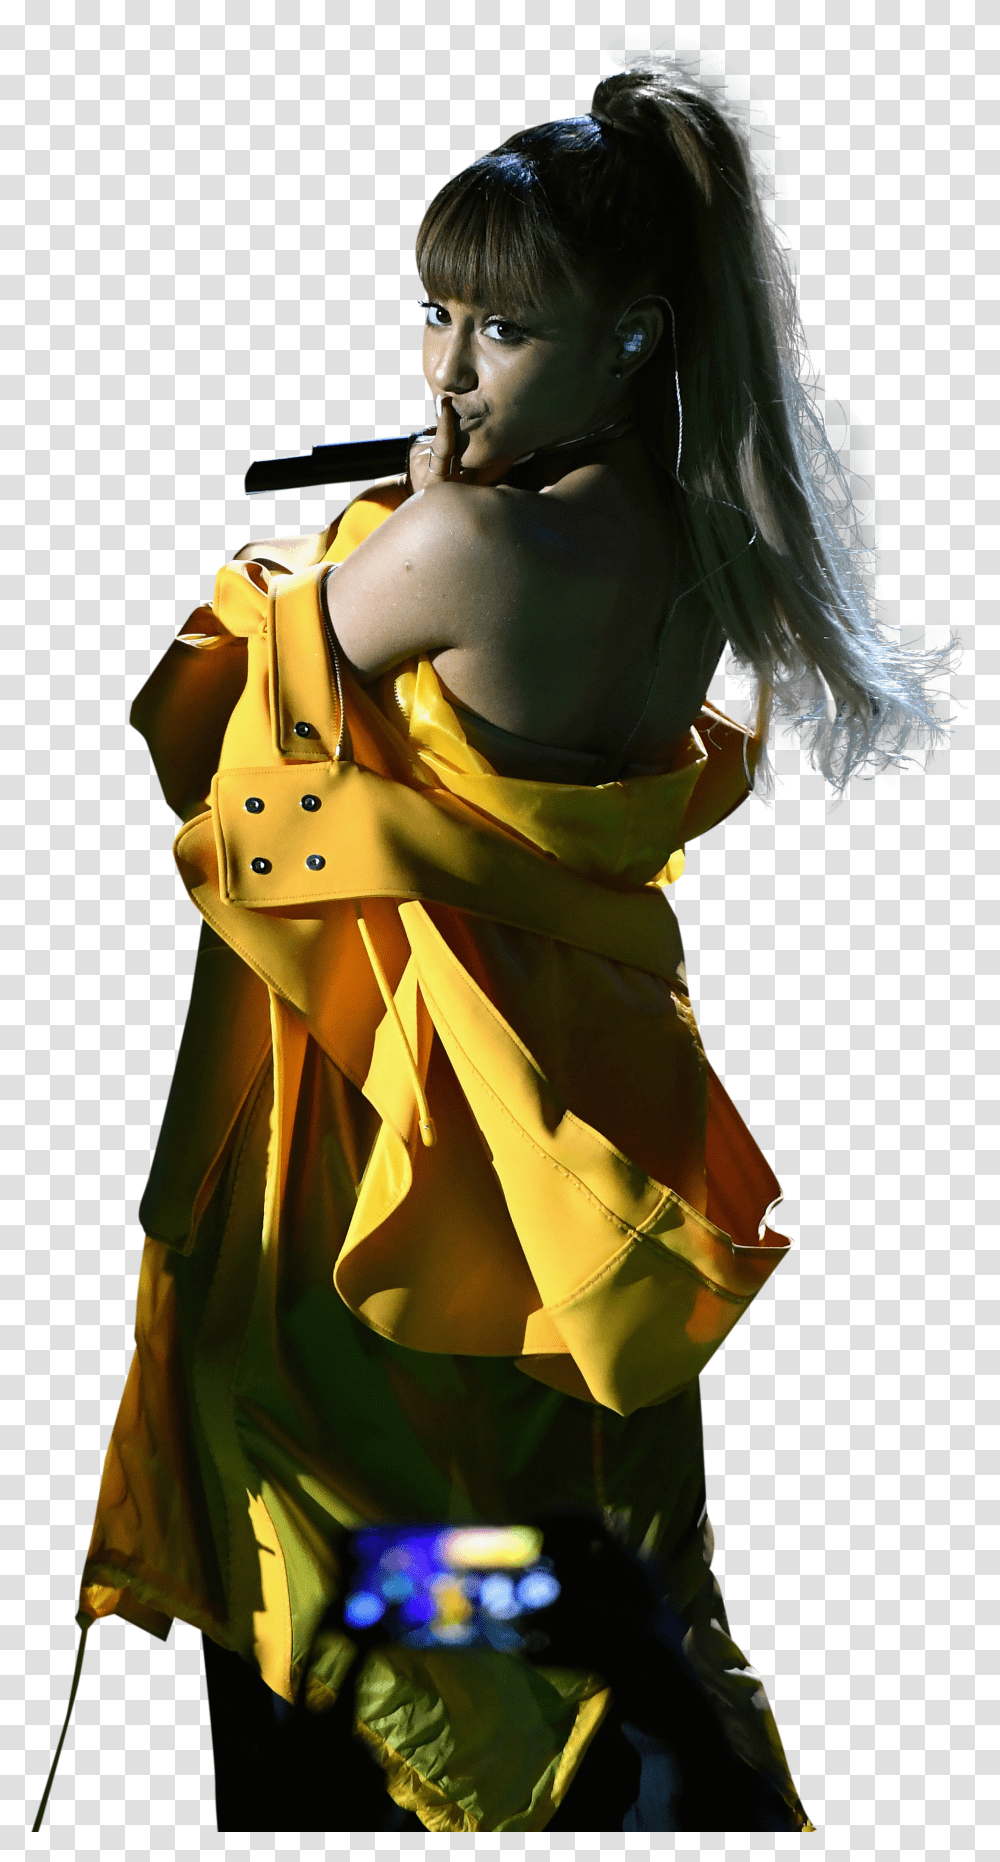 Ariana Grande In Yellow Dress On Stage Transparent Png